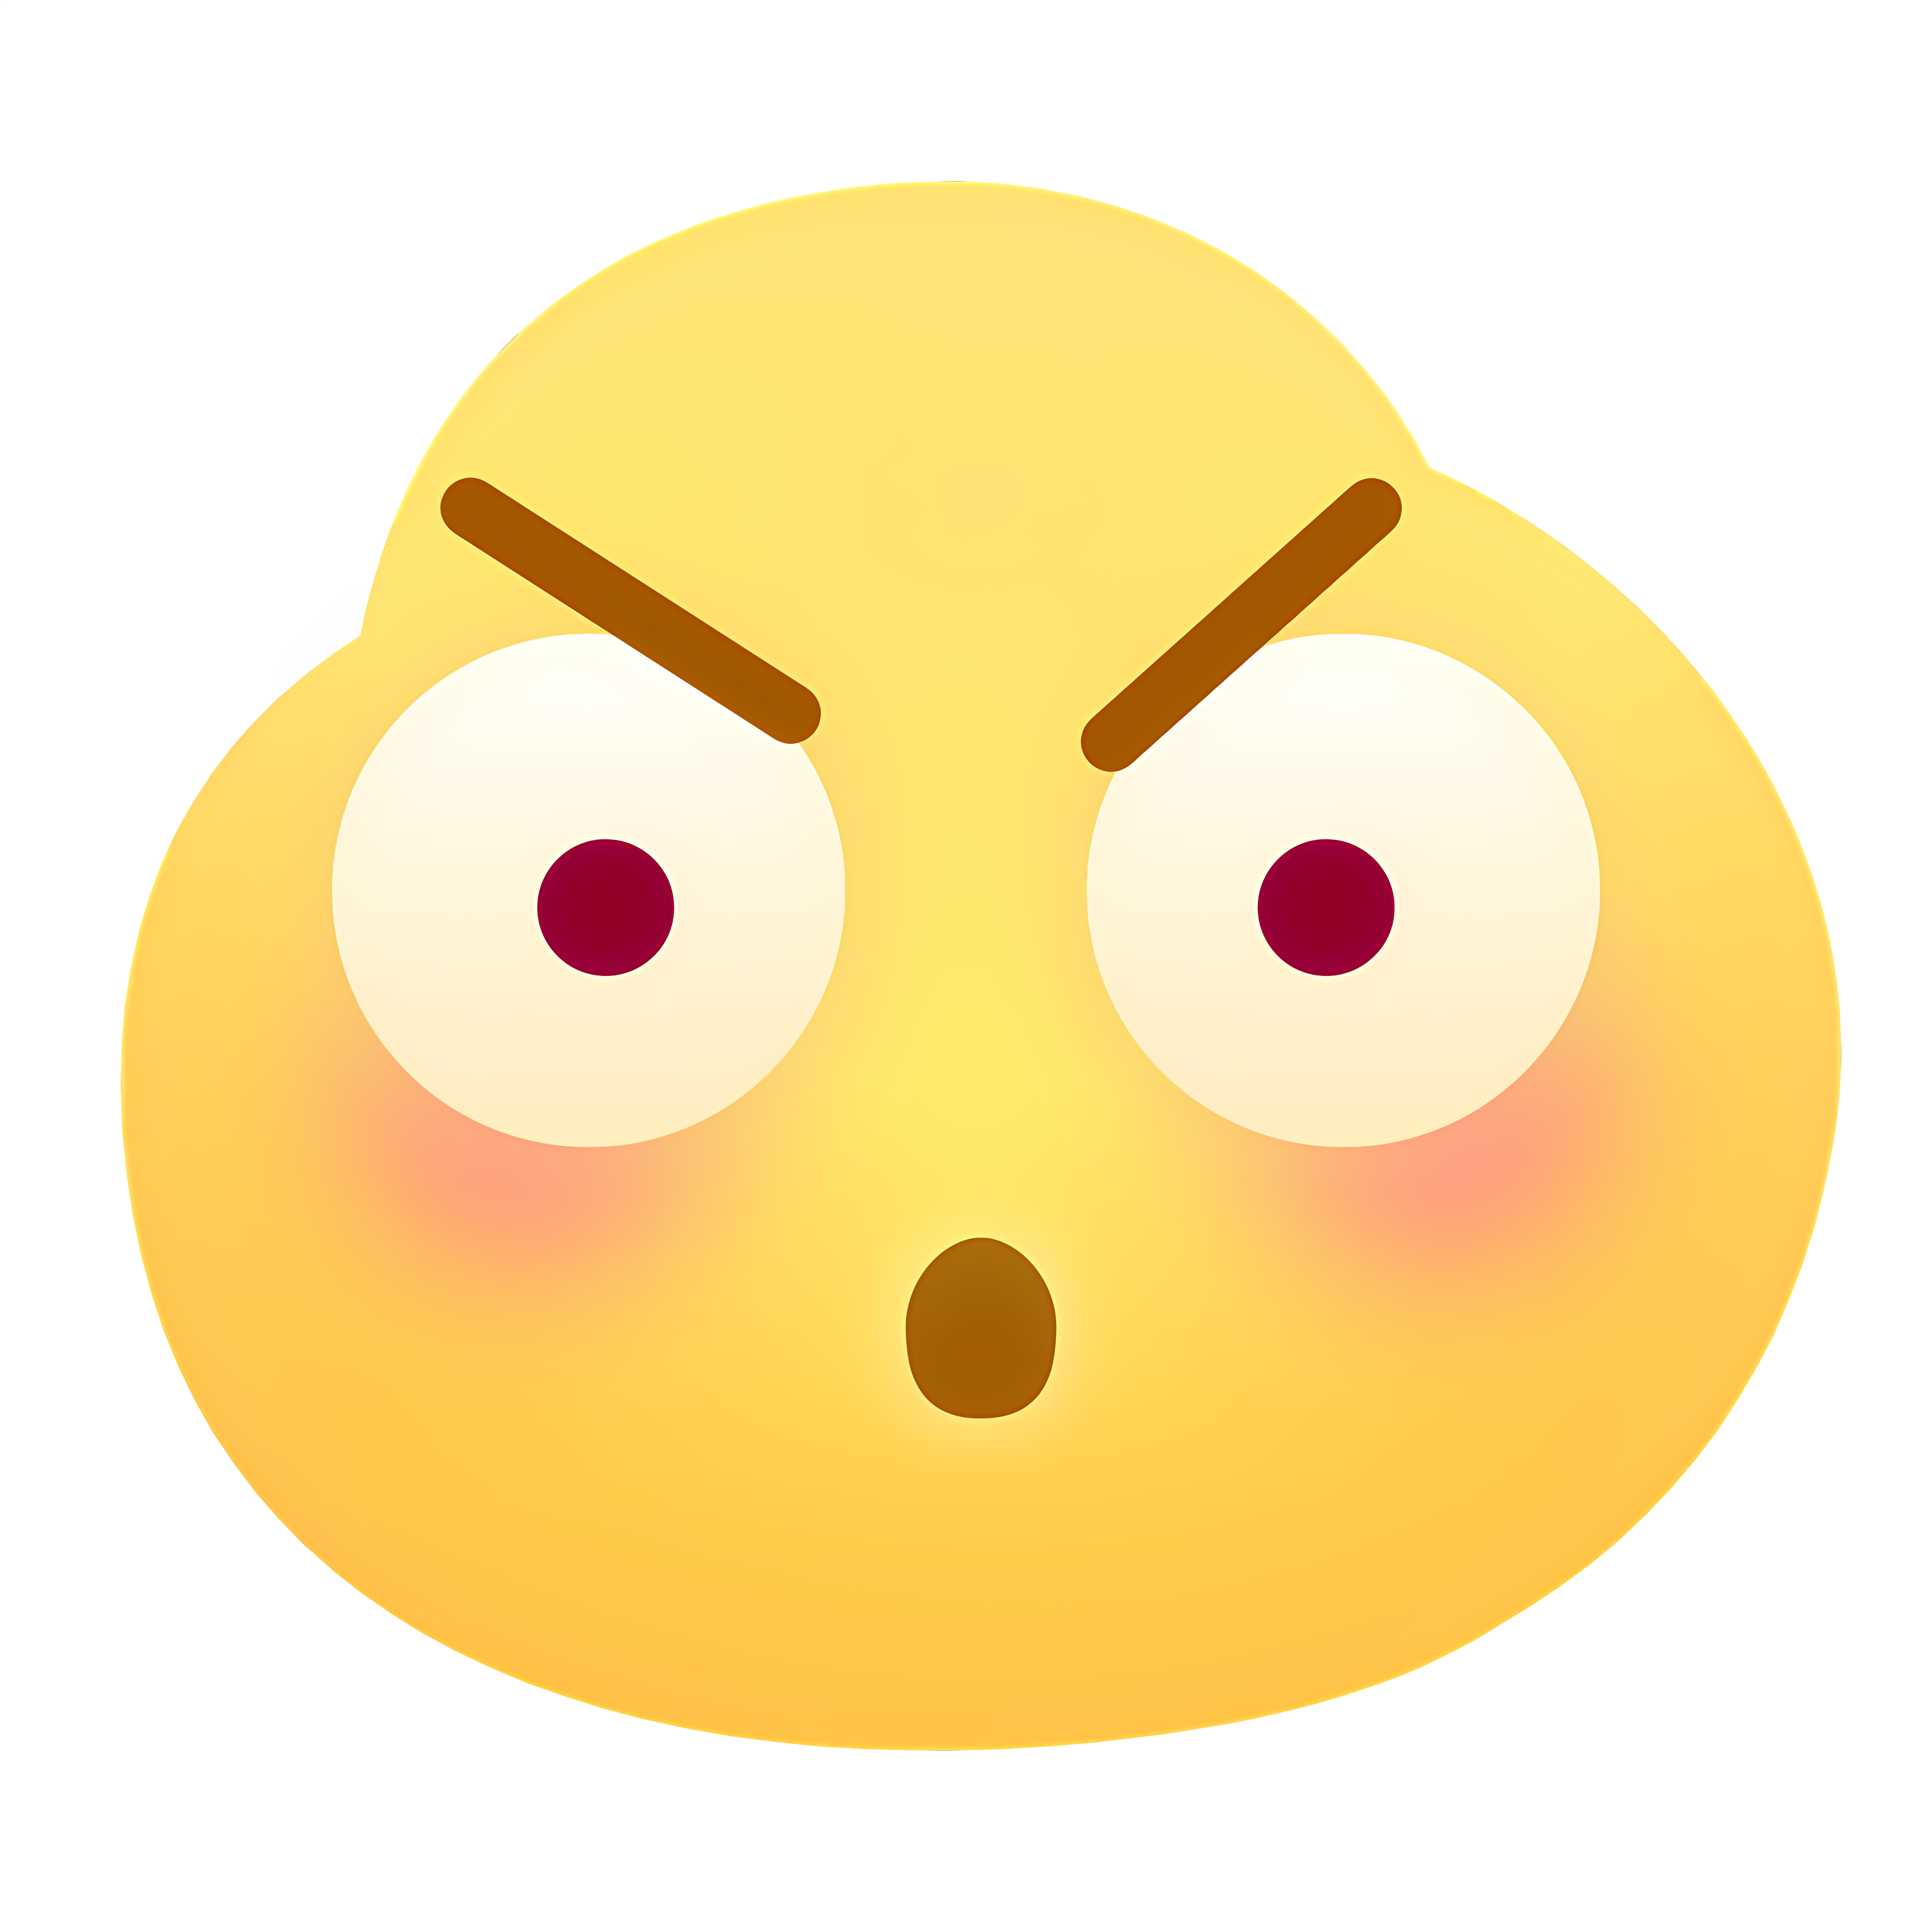 Angry emoji with narrowed eyes and open mouth Clipart